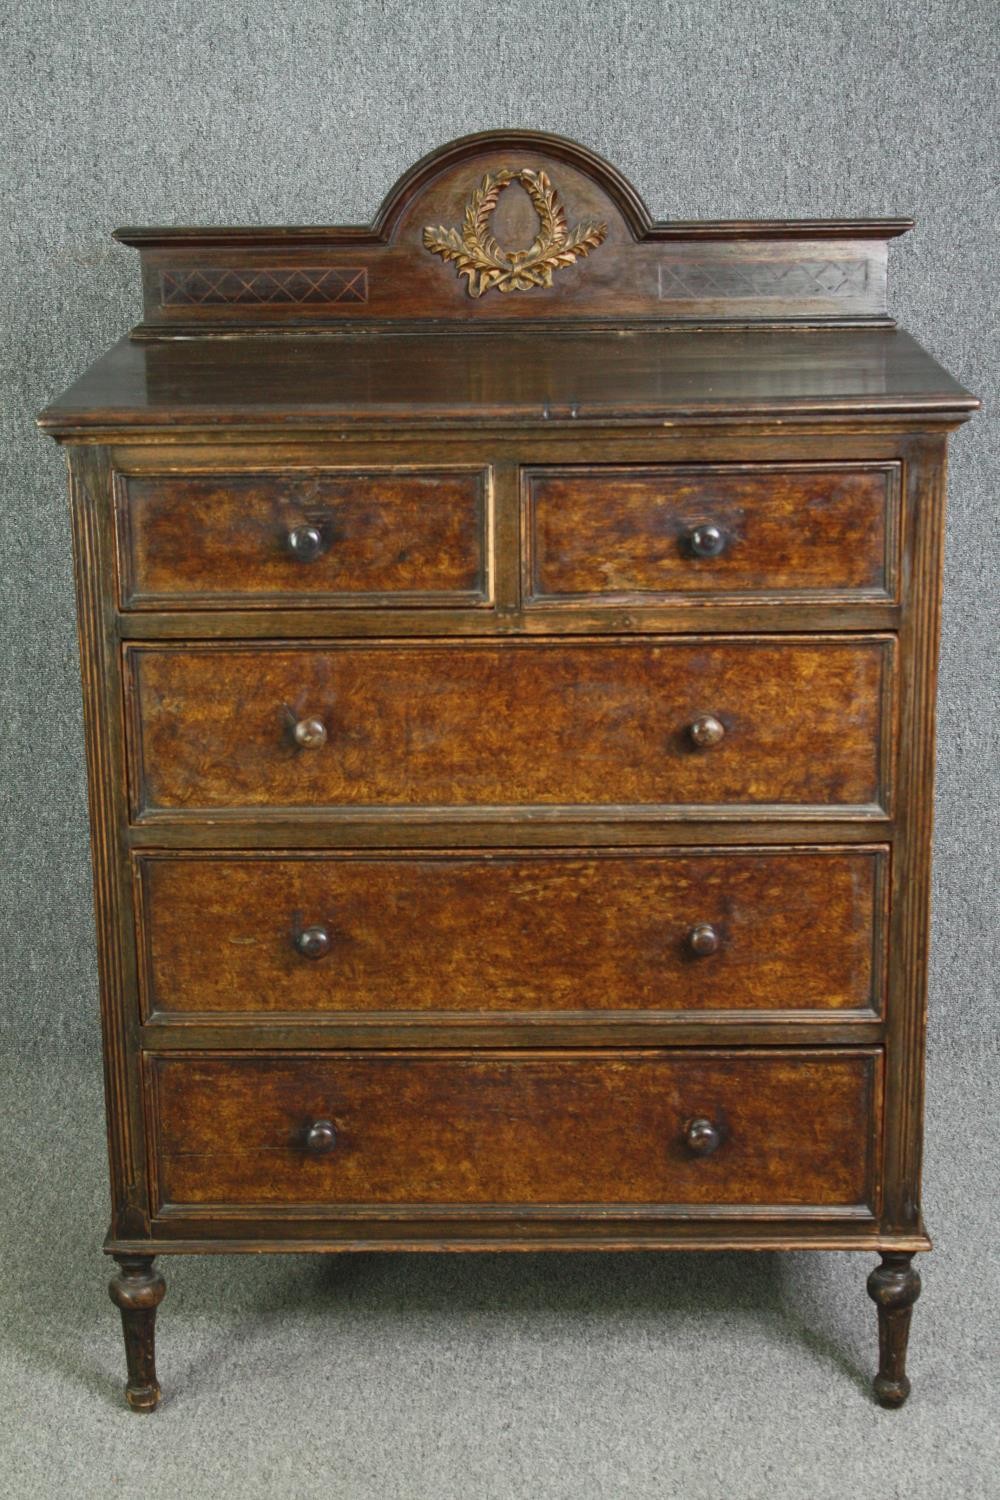 Chest of drawers, C.1900 Continental style with gilt gesso laurel decoration. H.133 W.91 D.53cm.